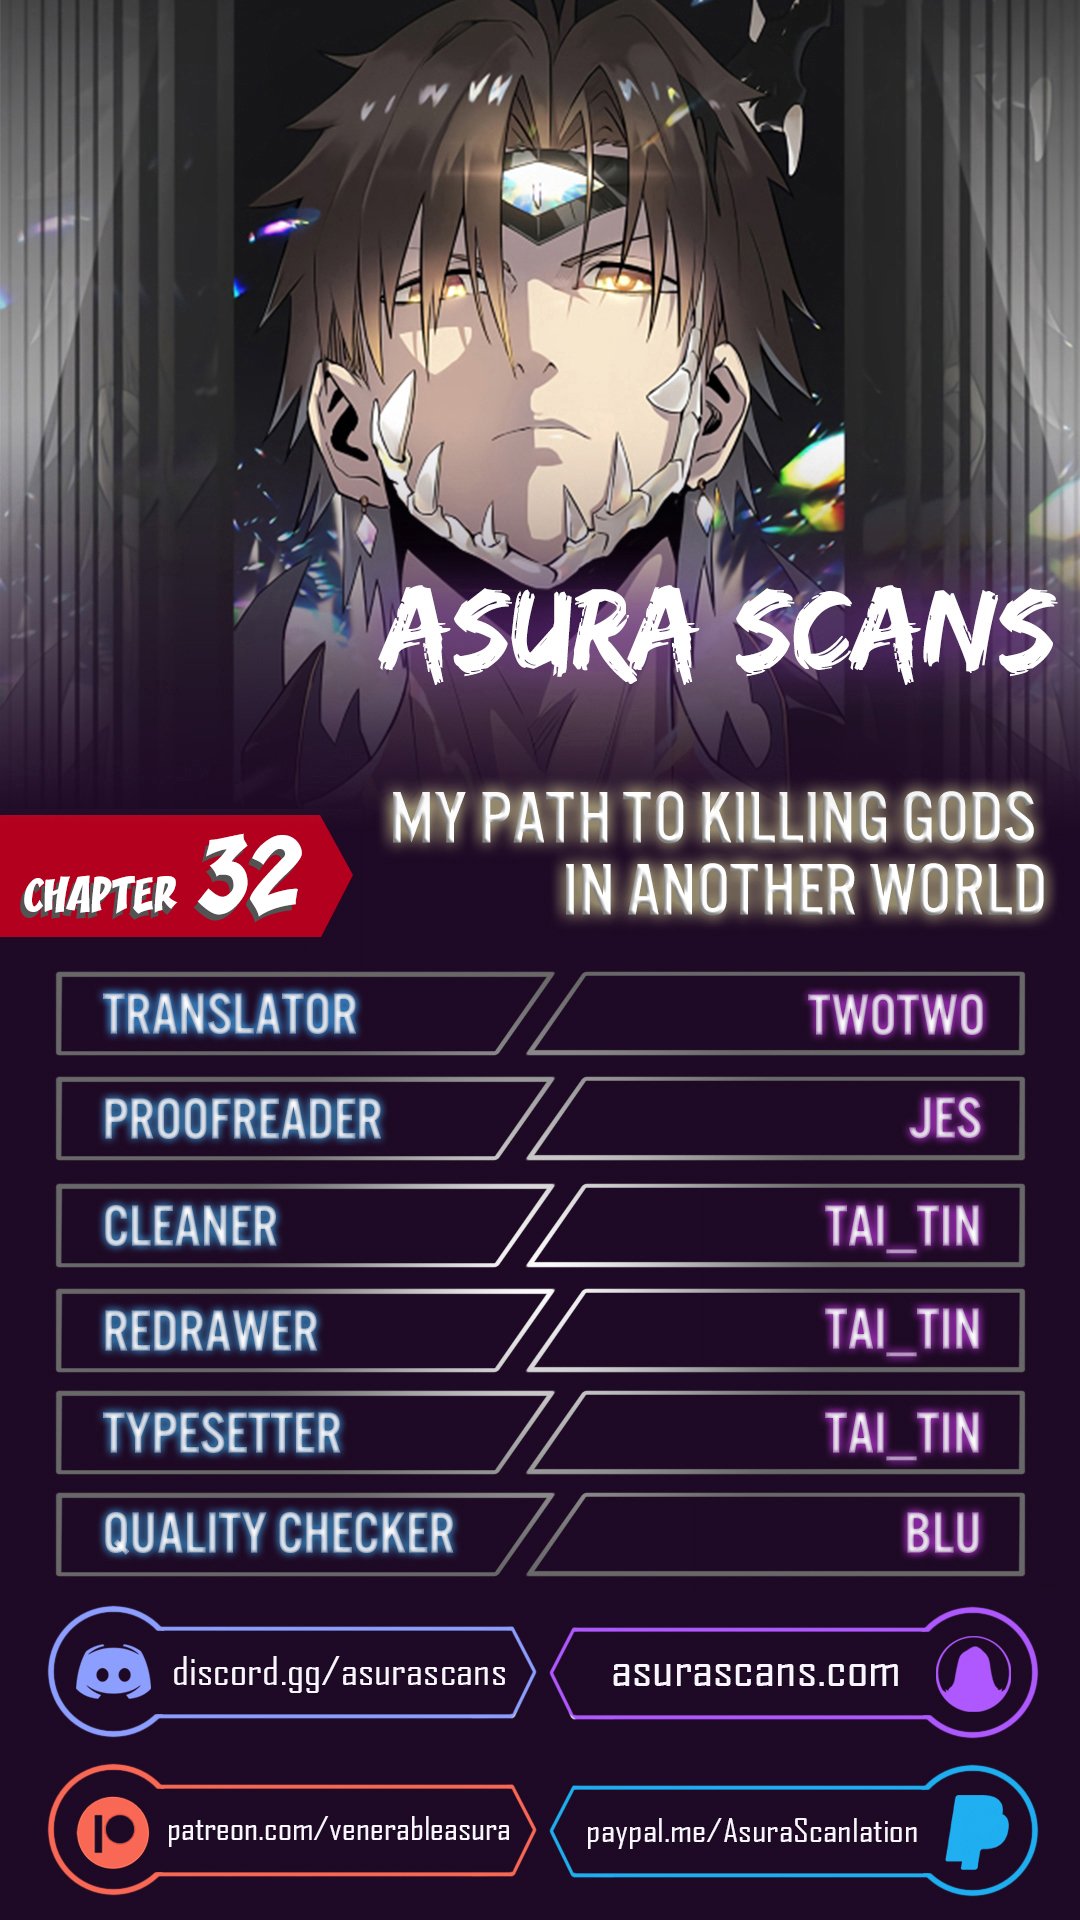 My Path to Killing Gods in Another World - Chapter 23183 - Image 1